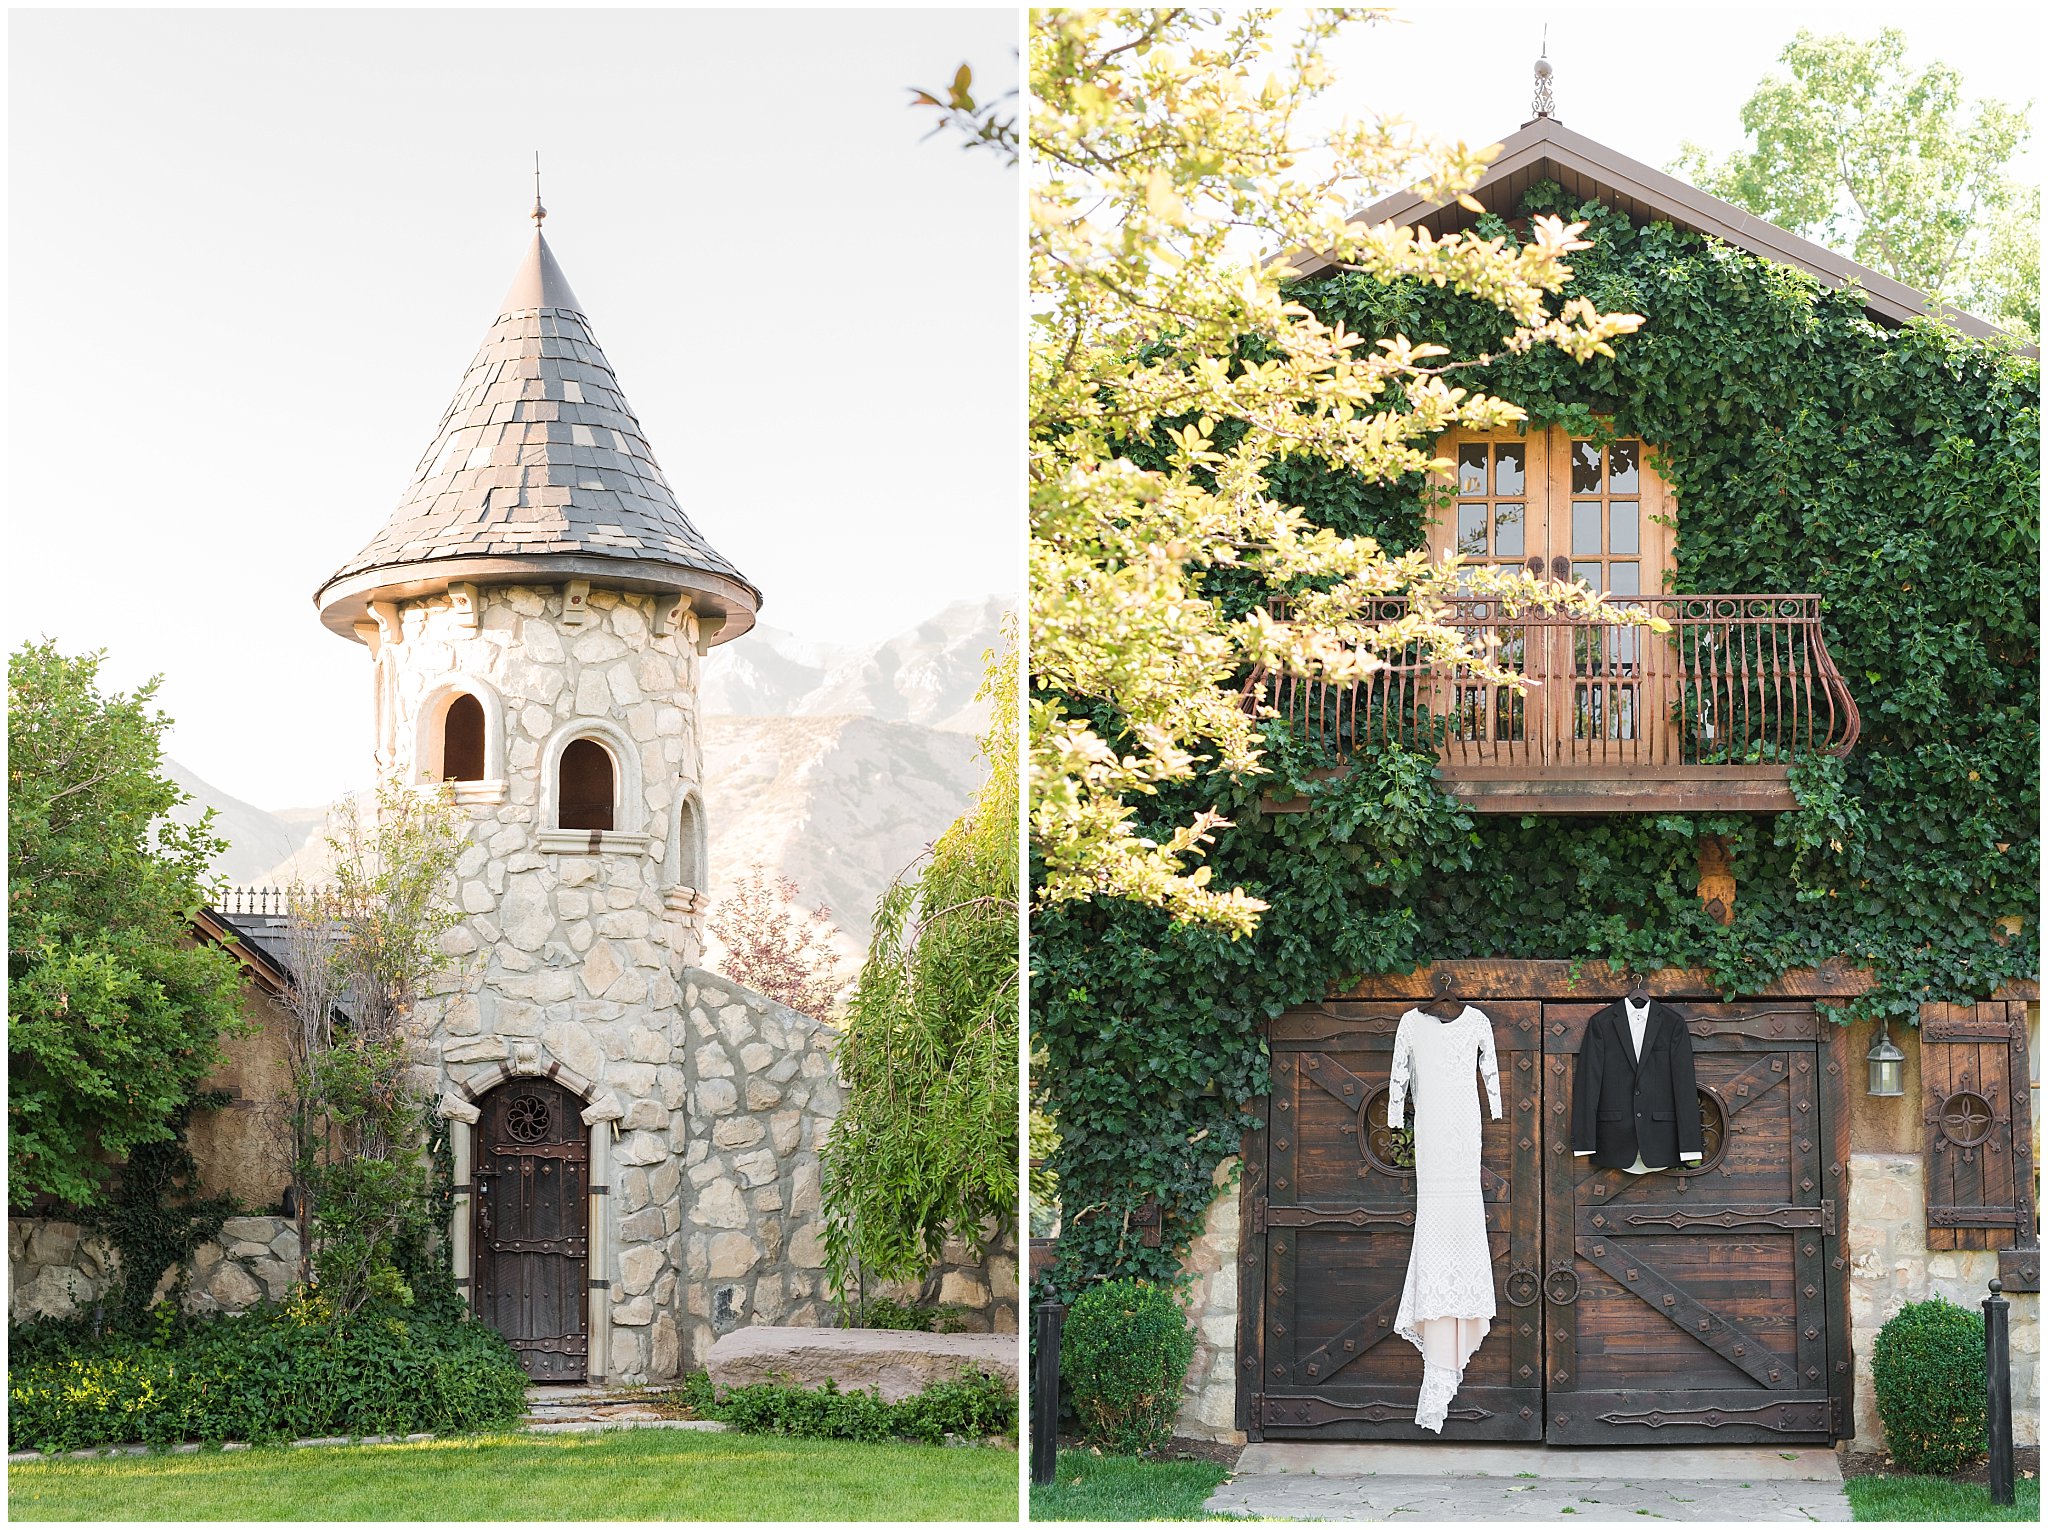 Castle Turret and Dress and Suit hanging on doors | Wadley Farms Summer Wedding | Jessie and Dallin Photography